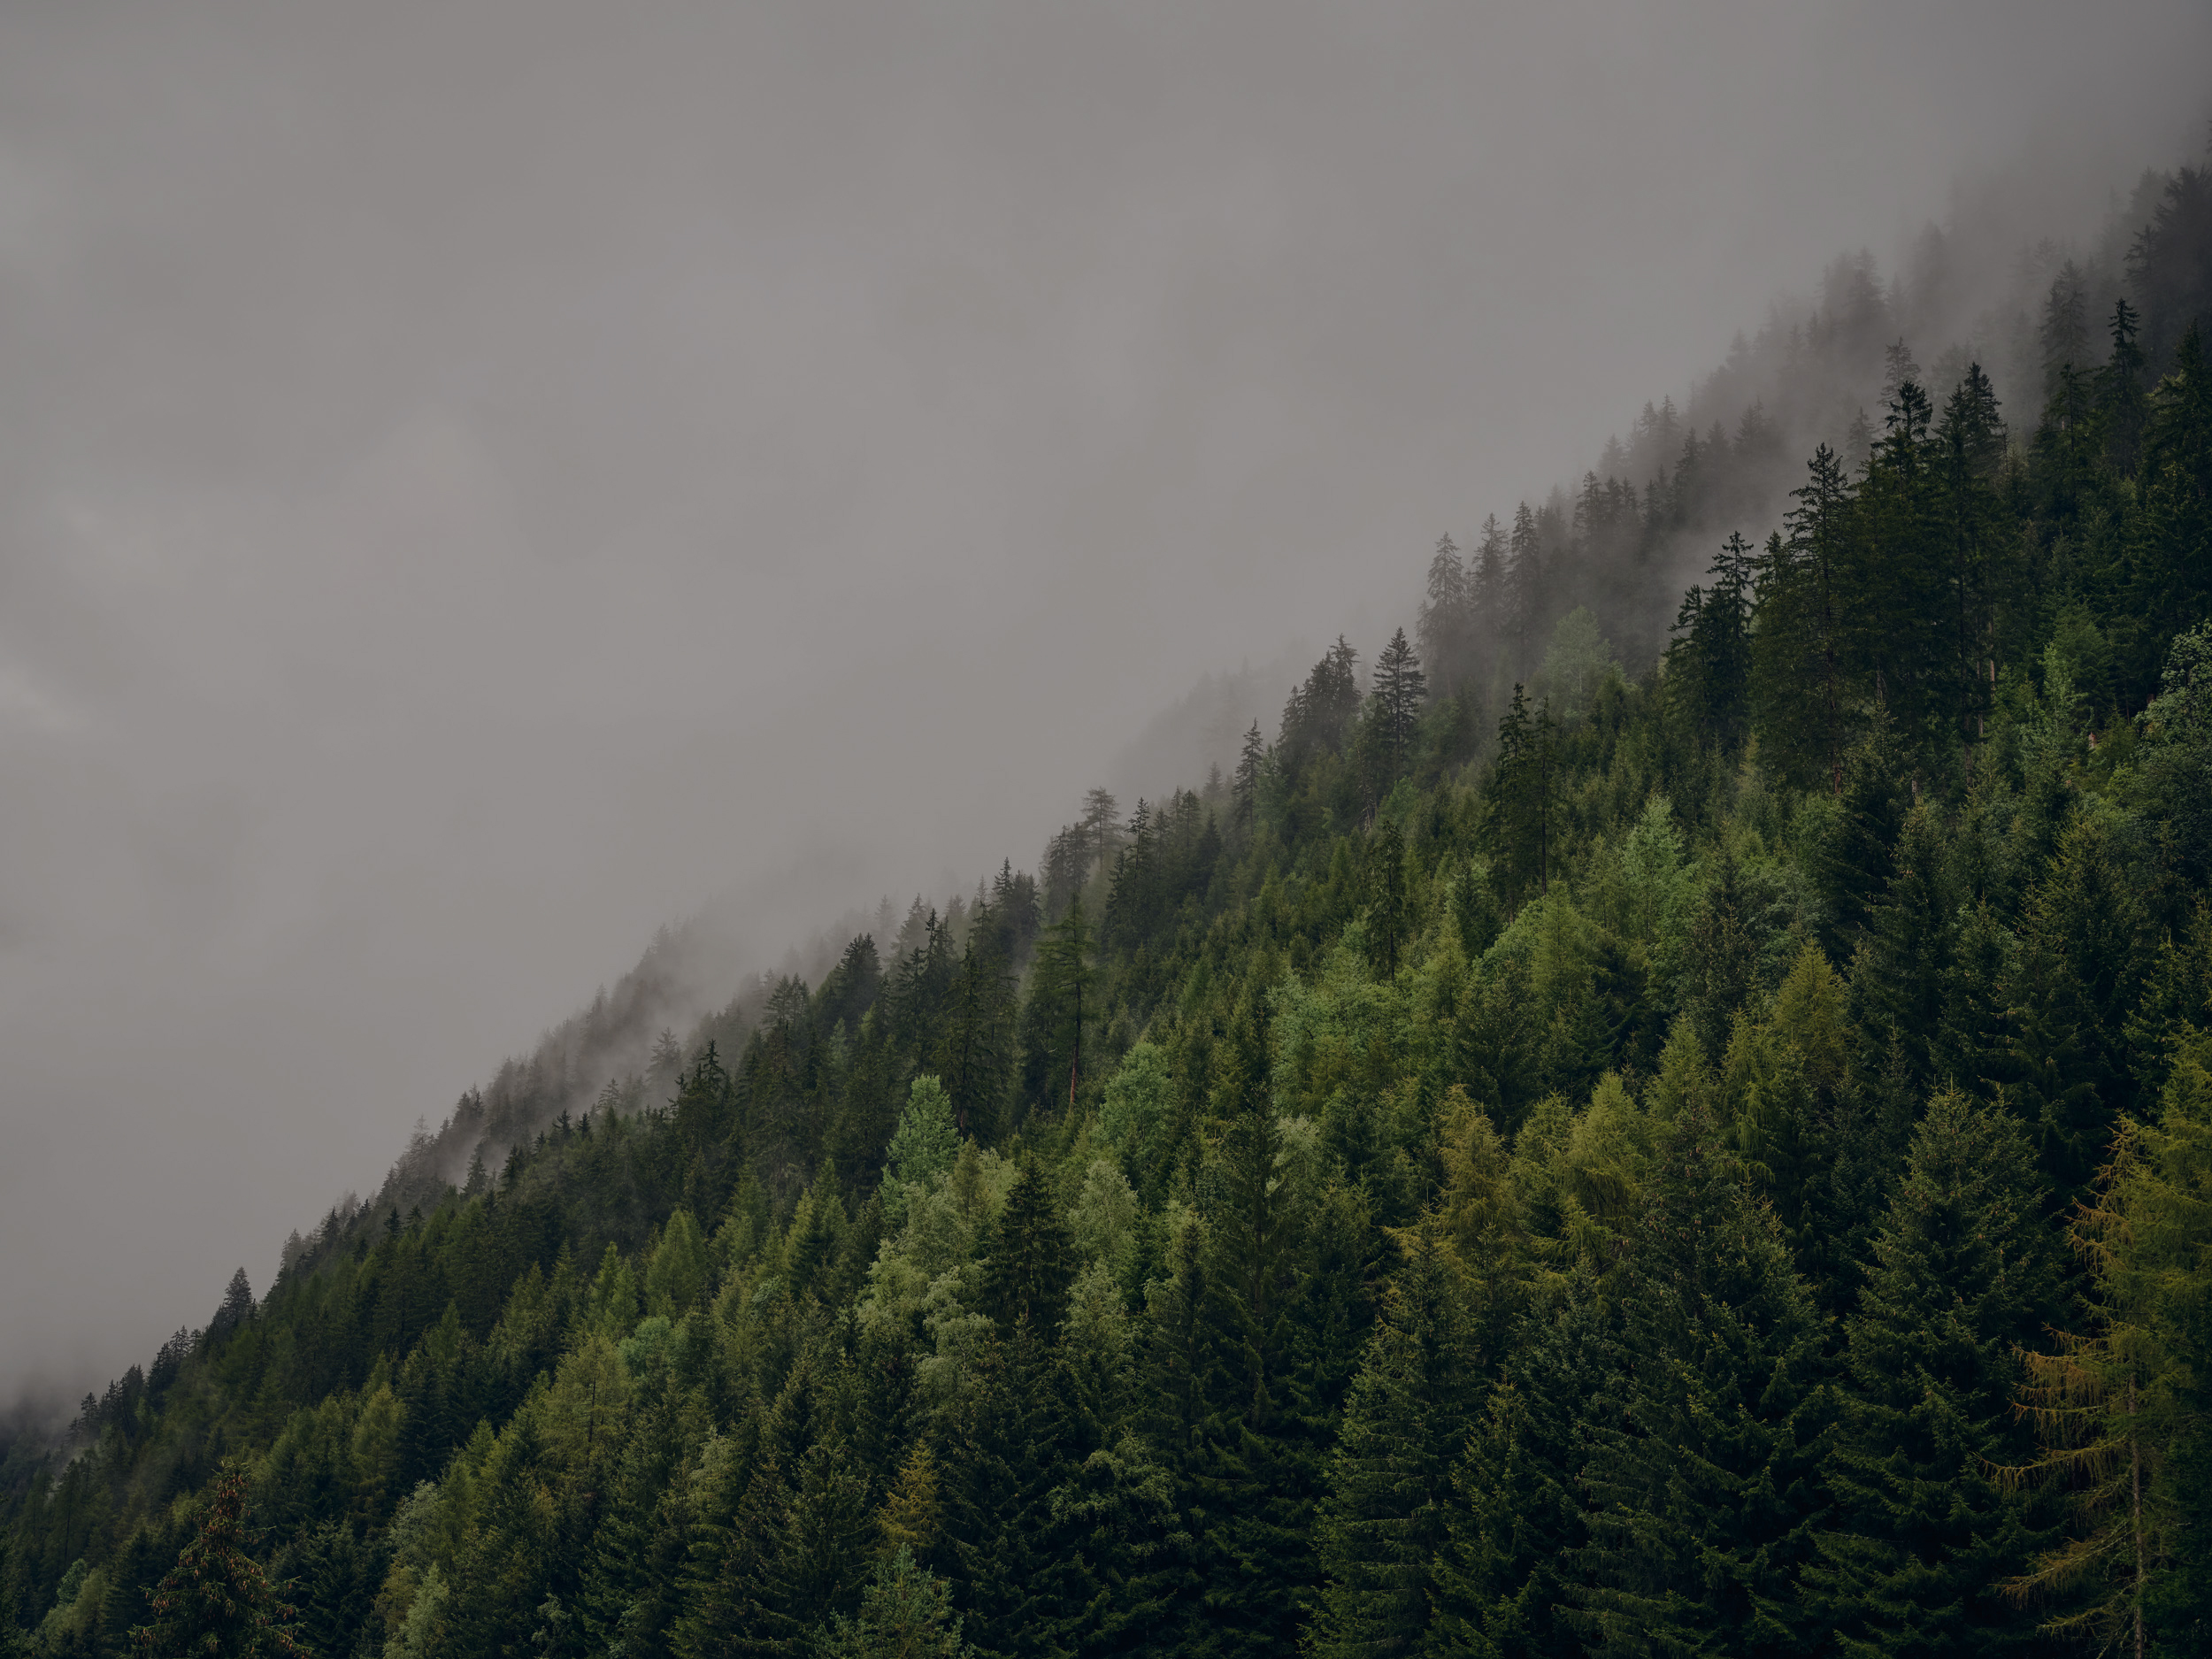 Low-hanging clouds over a forested mountain slope